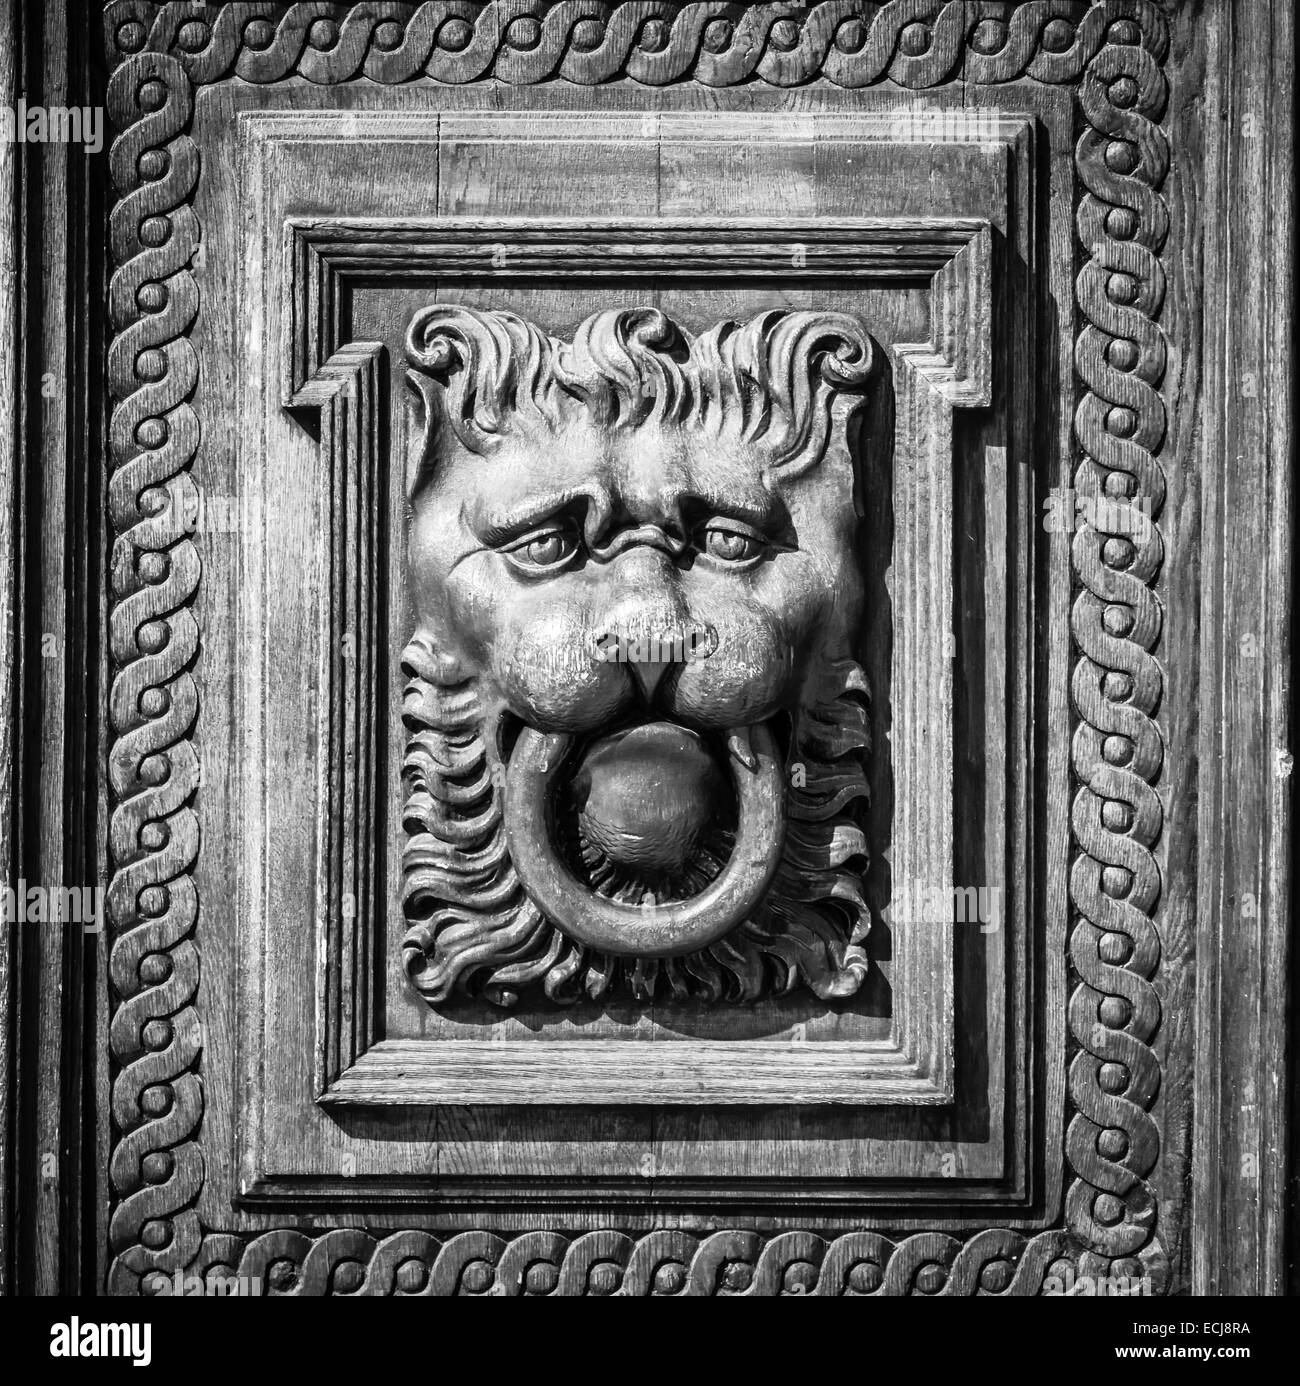 Woodcarving. Decoration vintage gate of the Old Town Hall. Prague. Black and white. Vignetting. Stylization. Stock Photo